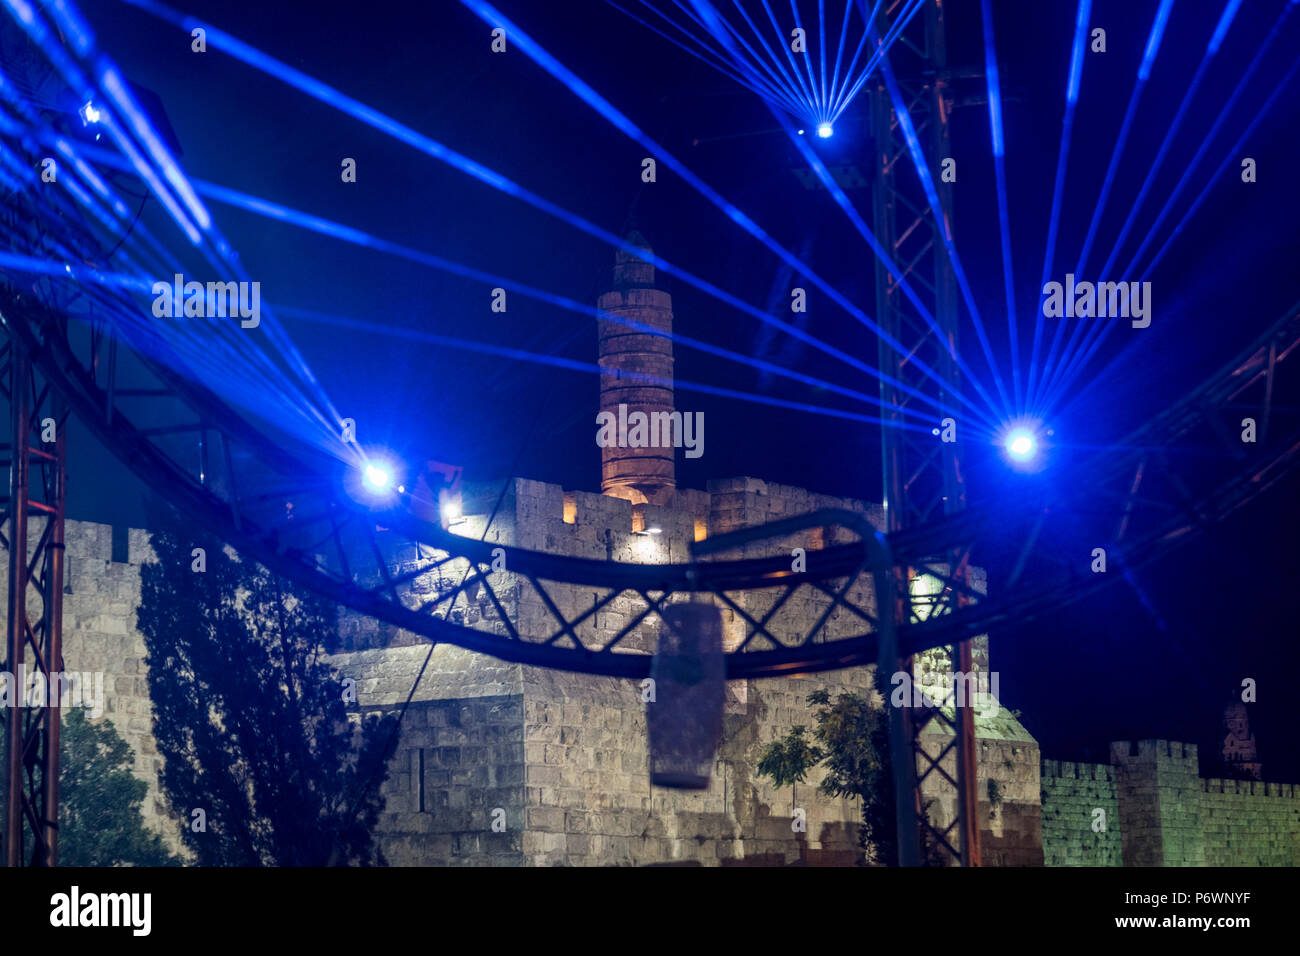 Jerusalem, Israel. 2nd July, 2018. The Tower of David in the Old city of Jerusalem with lasers in front of it, during the 2018 Festival of lights. This is the 10th anniversary of the festival, which draws hundreds of thousands of visitors to the old city of Jerusalem. Credit: Yagil Henkin/Alamy Live News Stock Photo